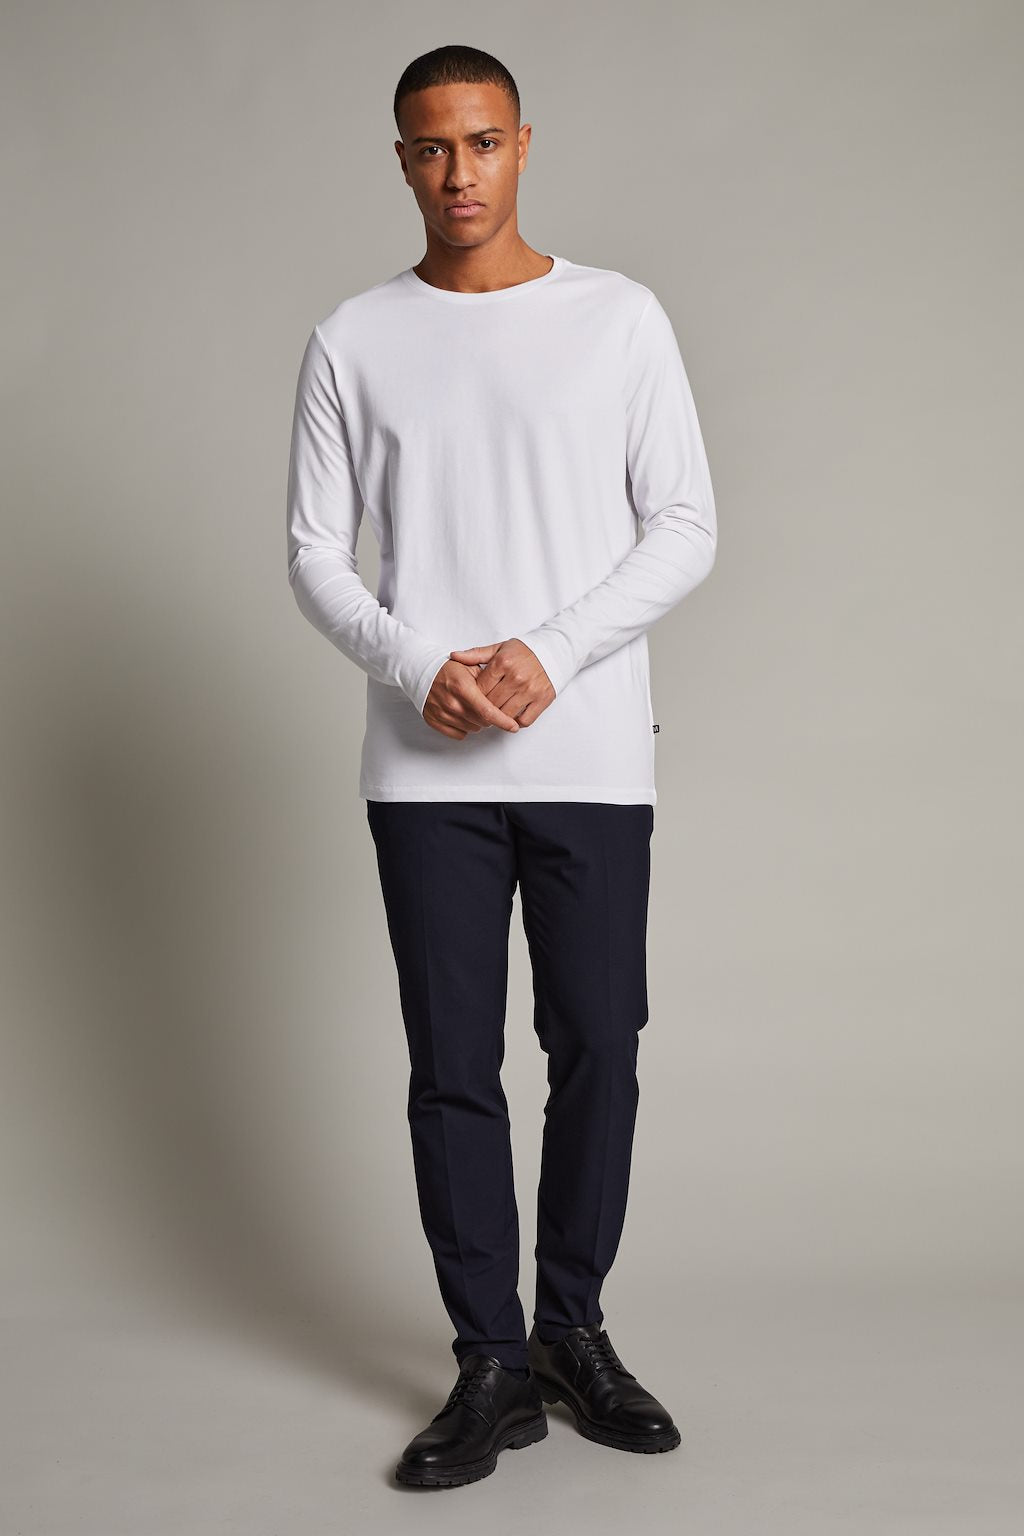 Jermalong Cotton Stretch LS T-Shirt in White